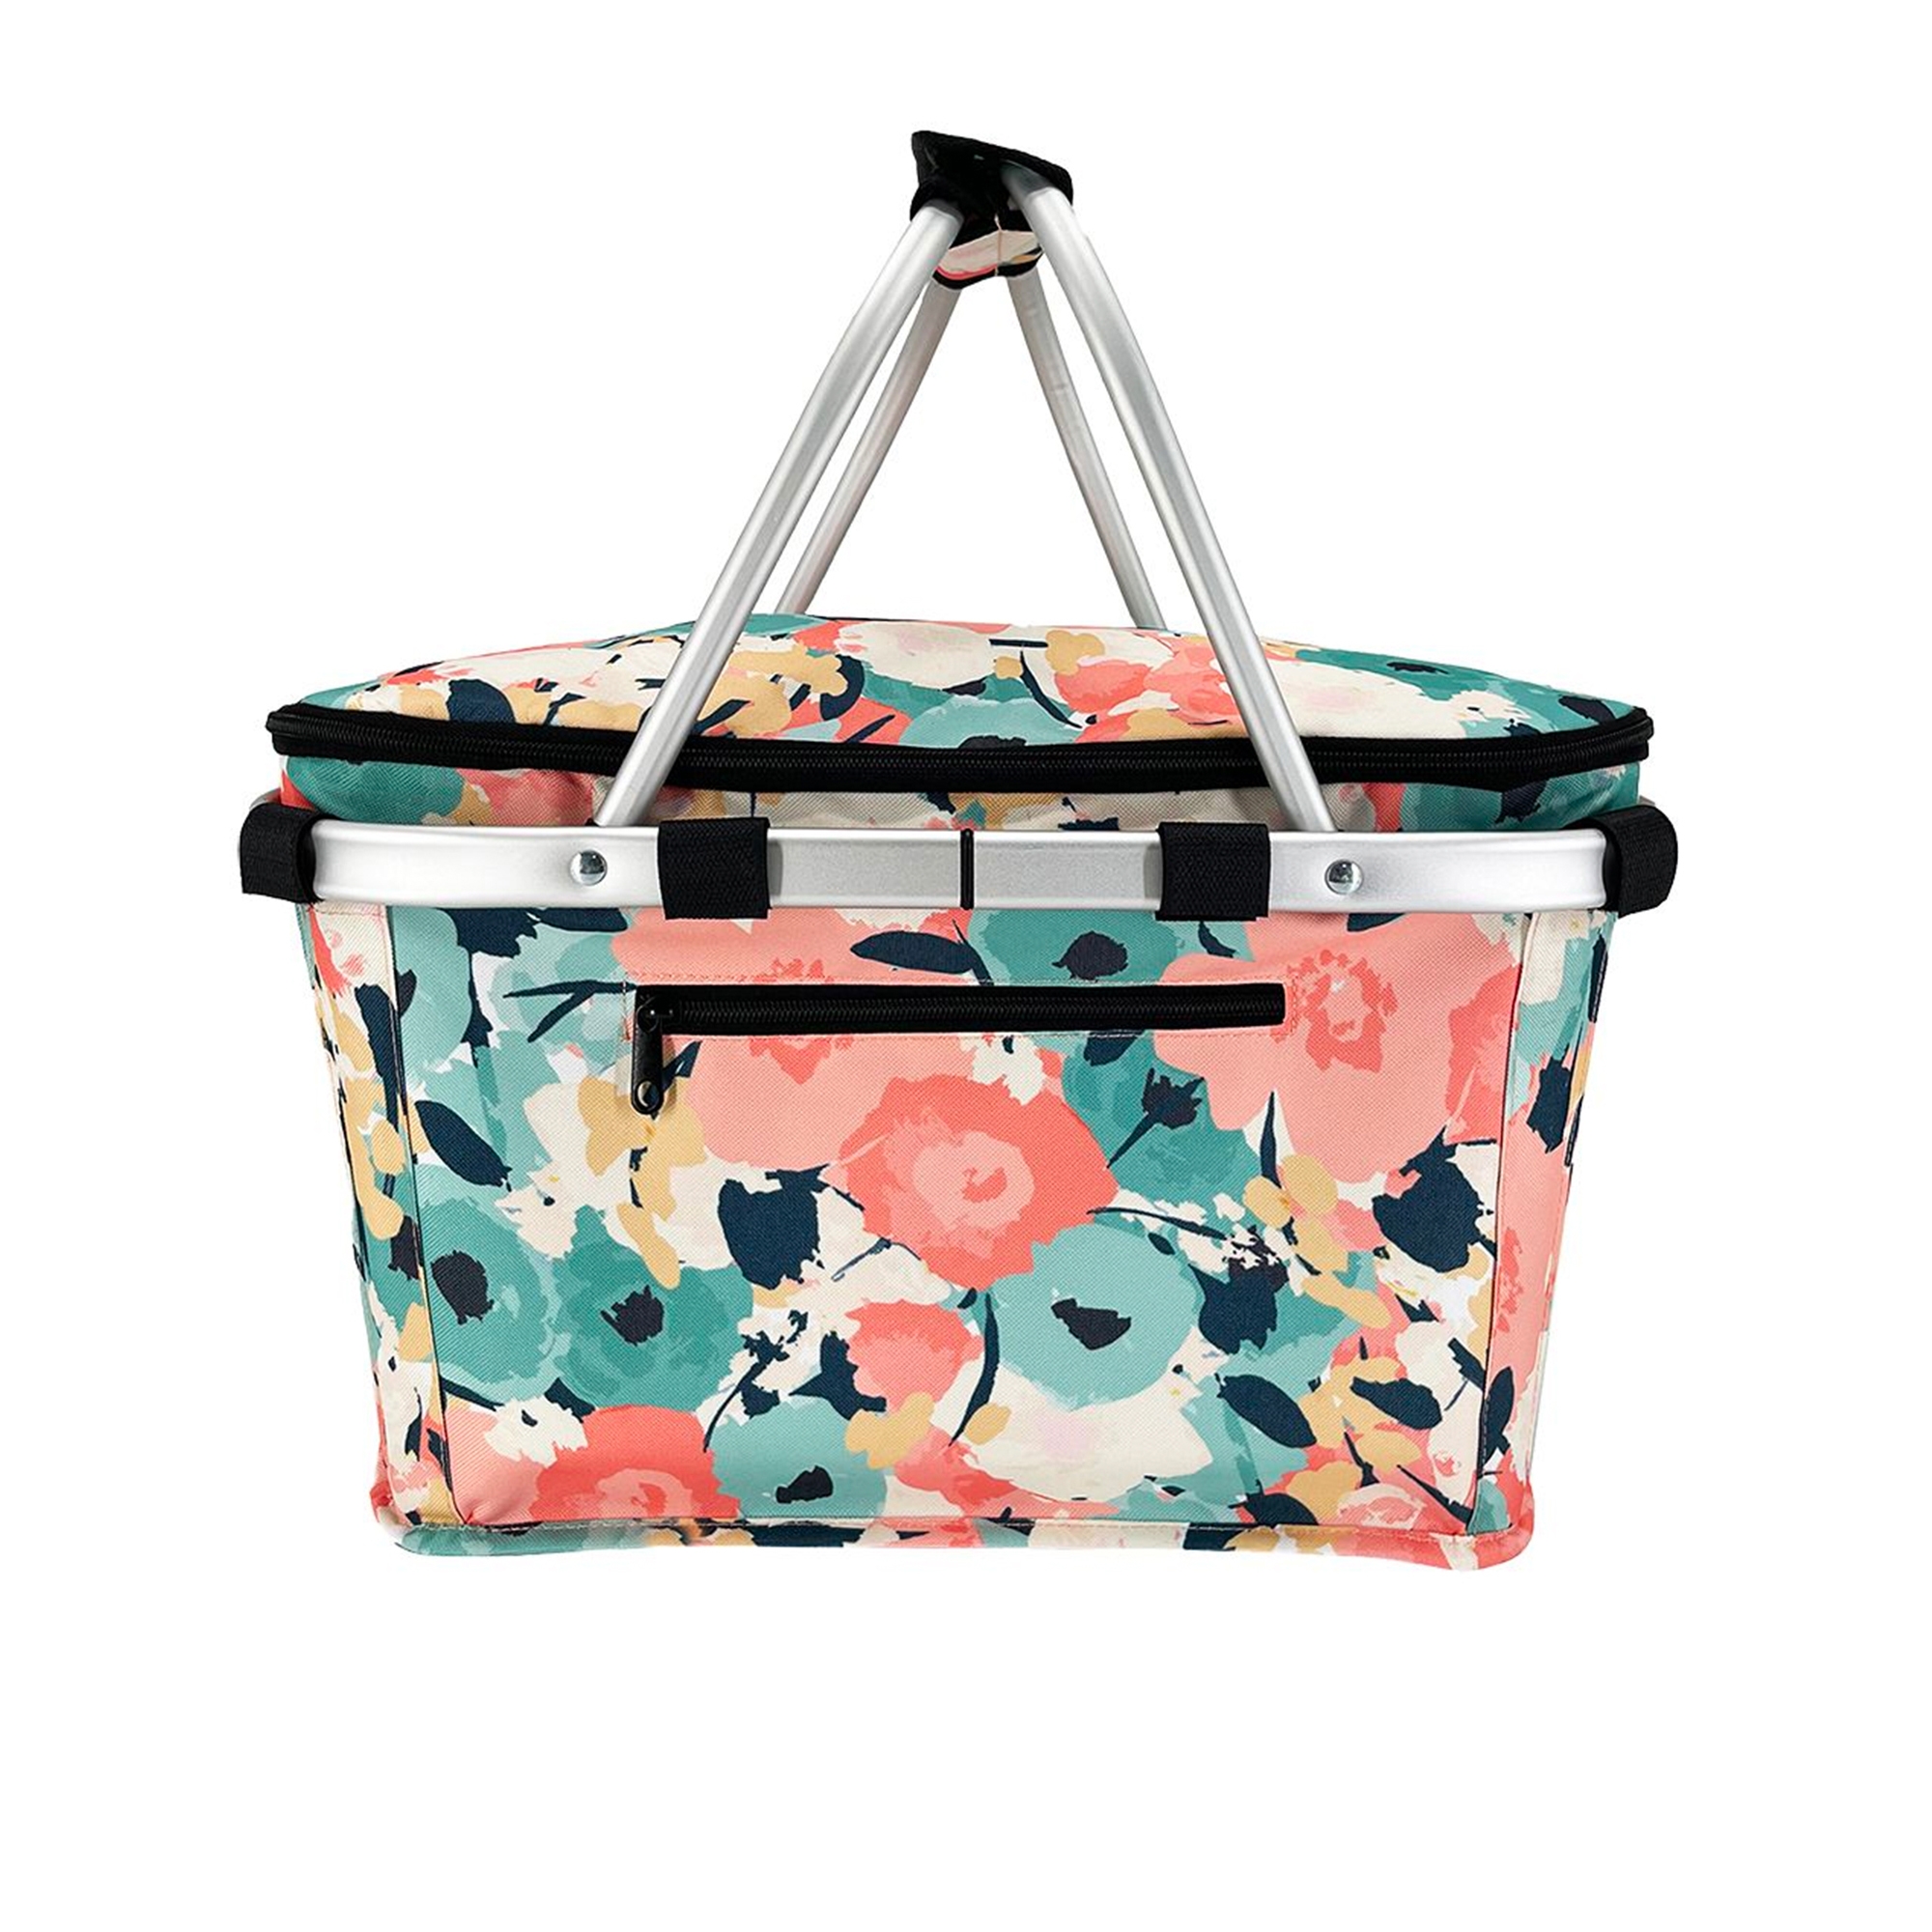 Sachi Insulated Carry Basket with Lid Pastel Blooms Image 2